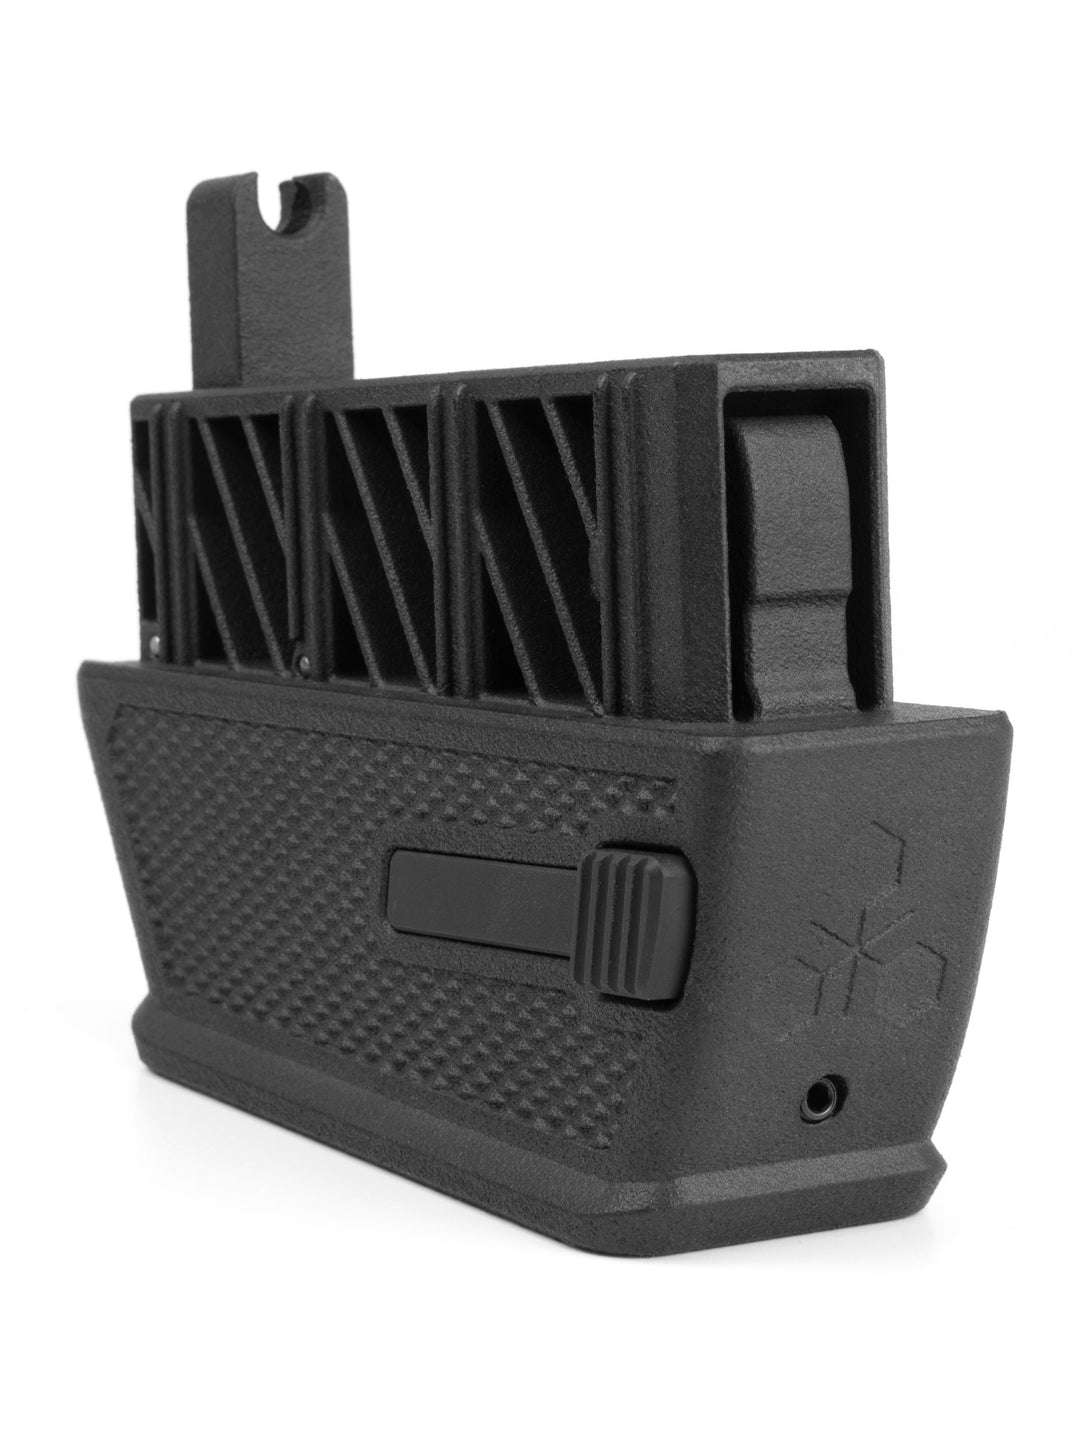 M4 Magazine Adapter for SSG24 / MOD24